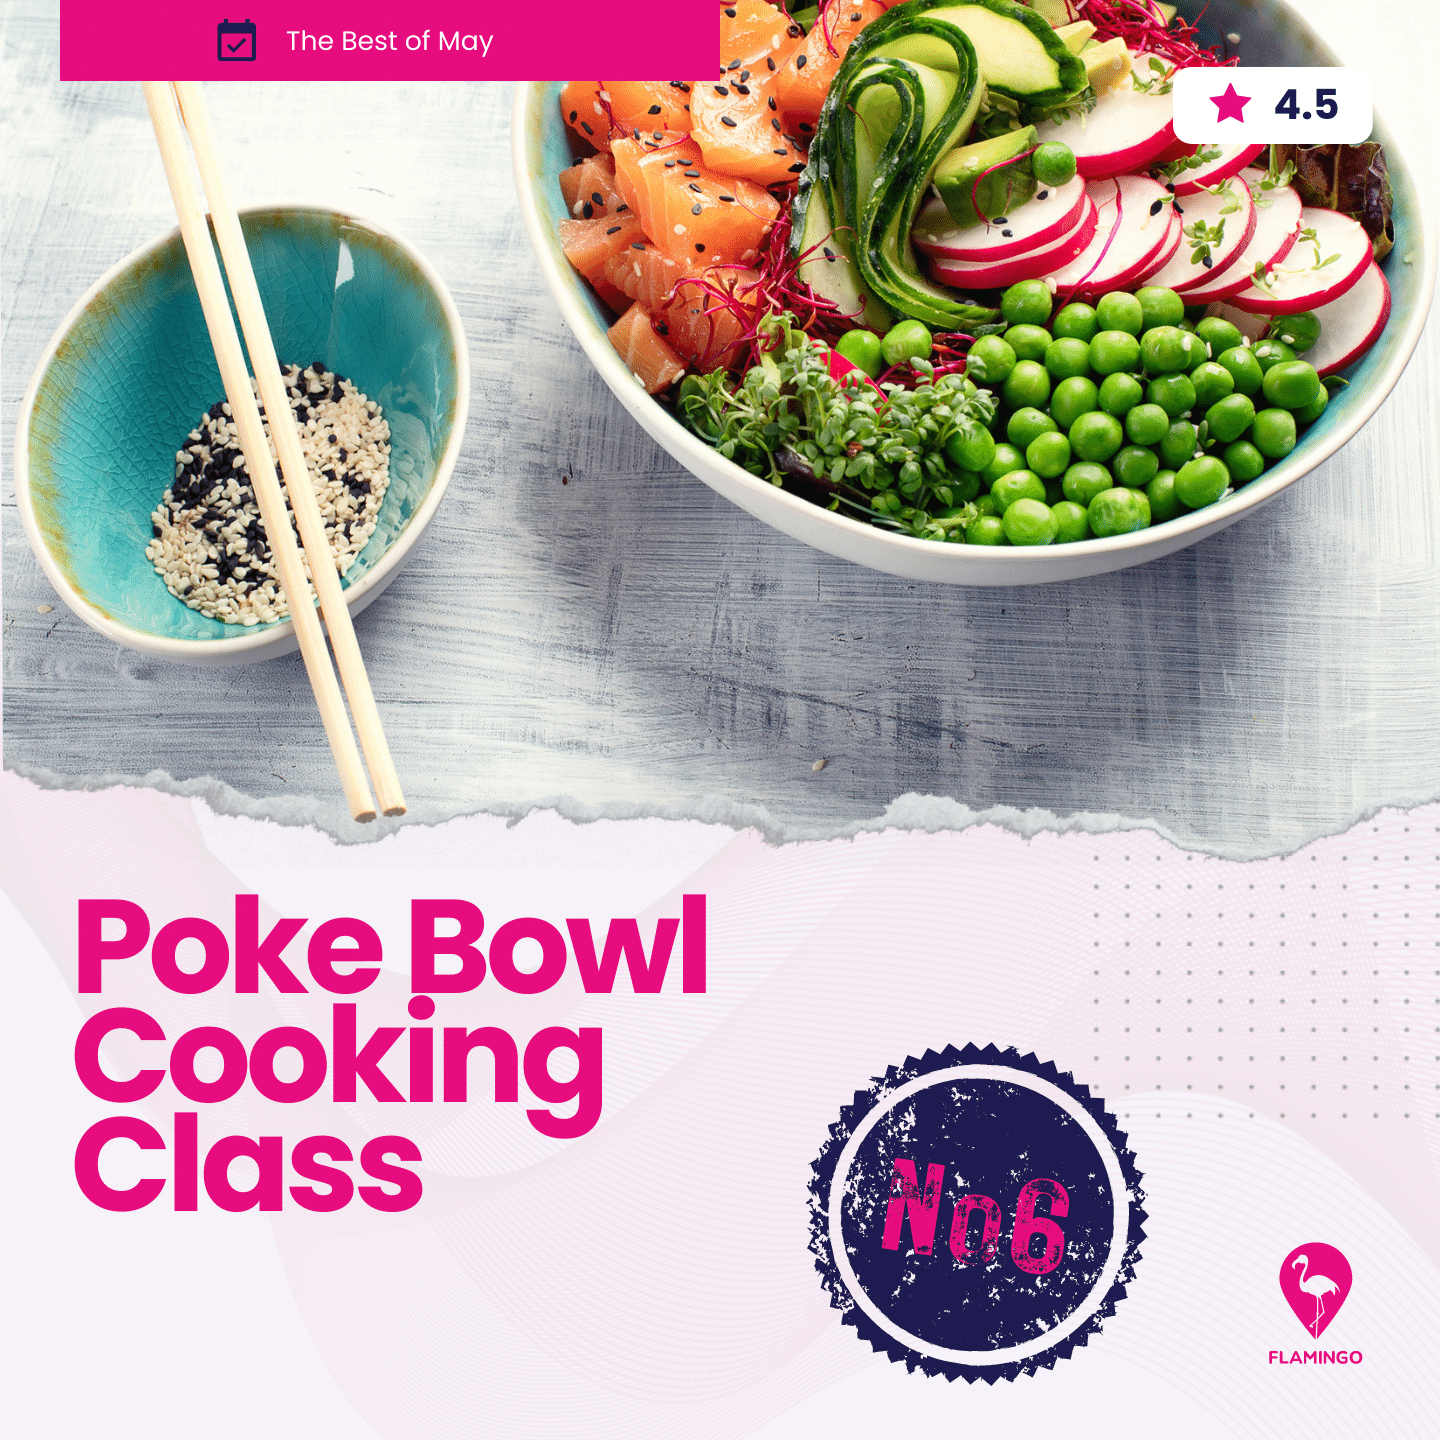 Poke Bowl Cooking Class | Resident Event Ideas for May